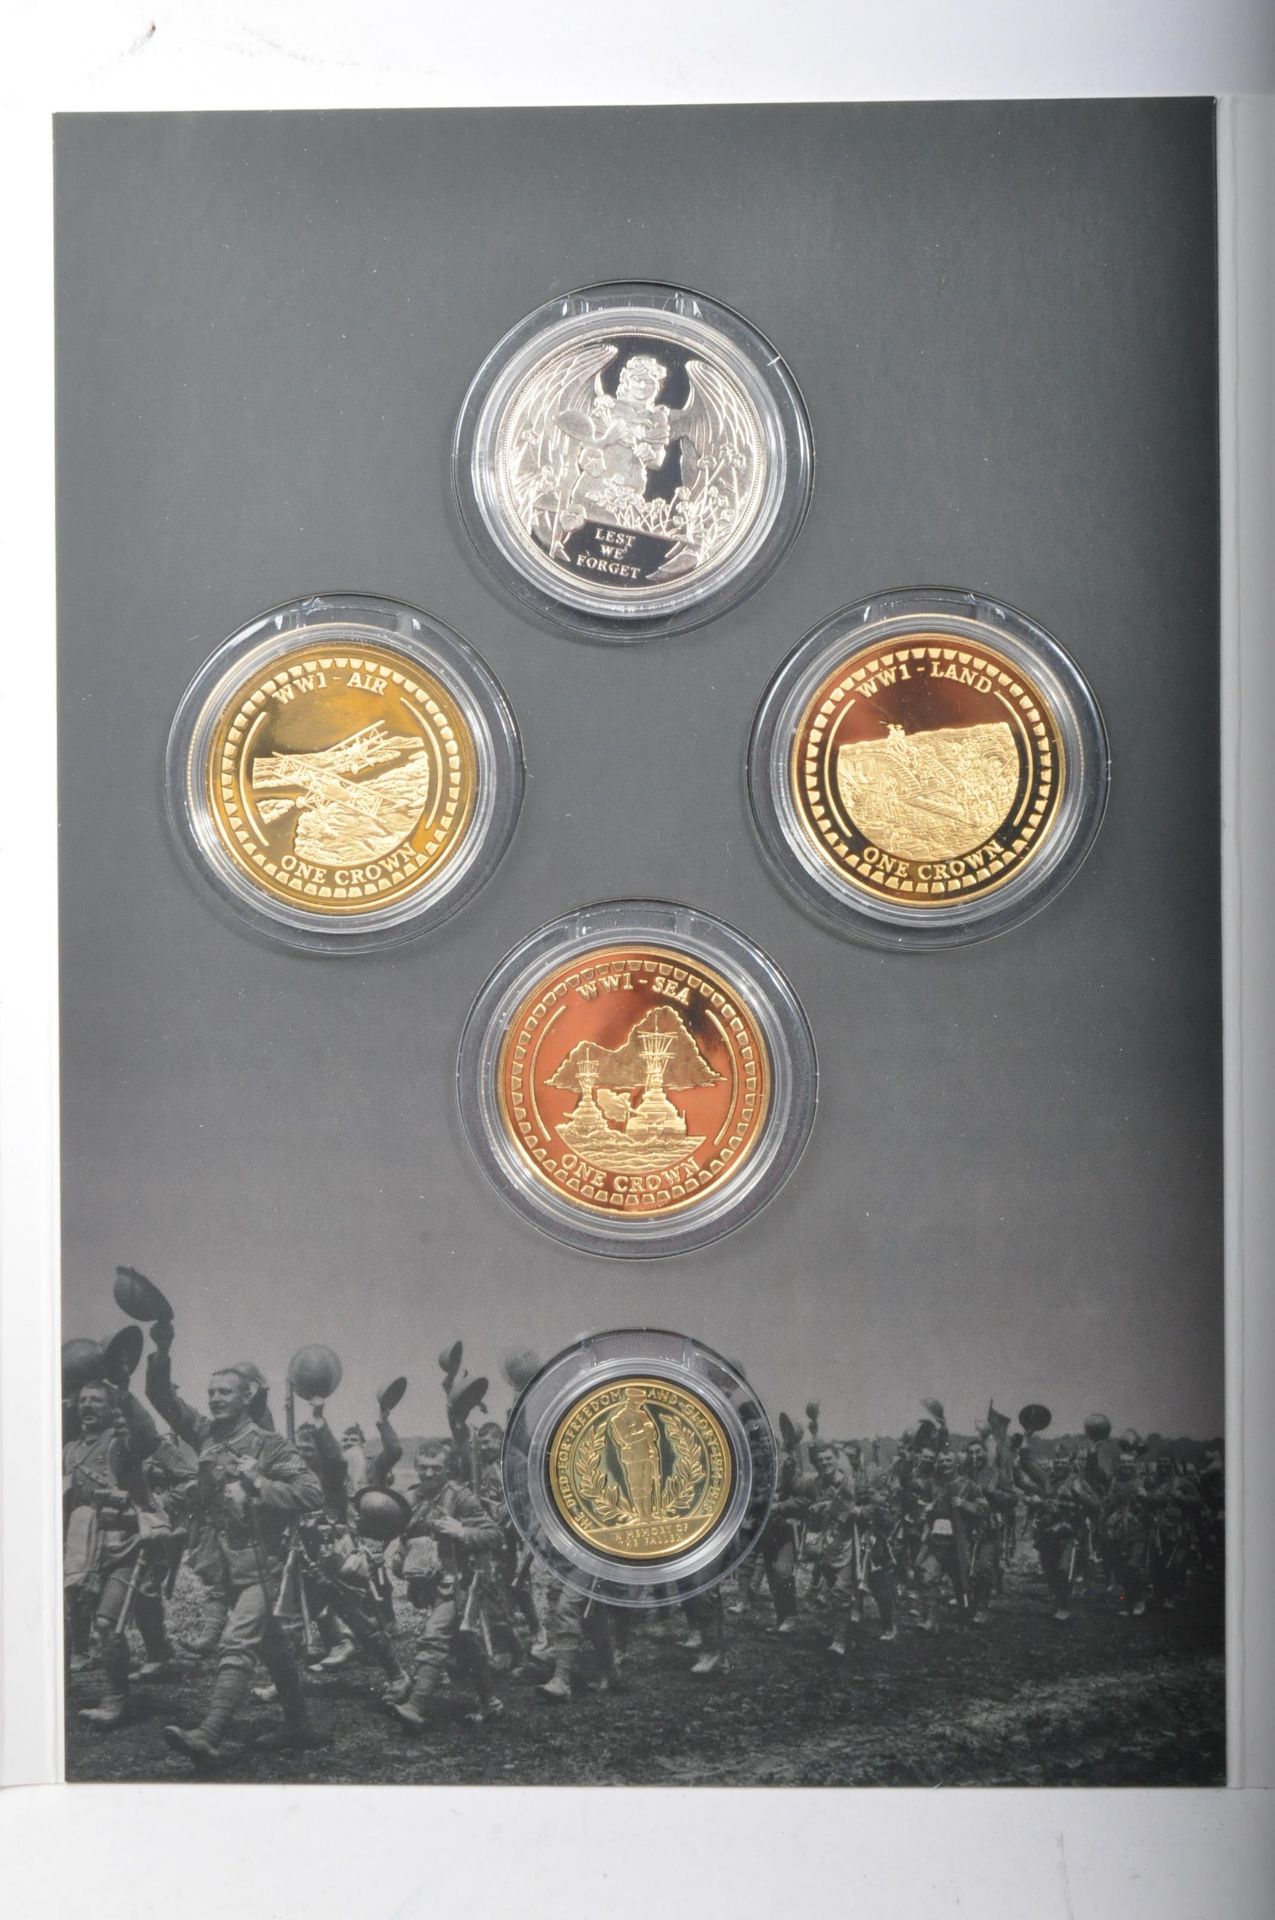 COINS - LONDON MINT - A WAR TO END ALL WARS - FIVE PROOF COIN SET - Image 4 of 5